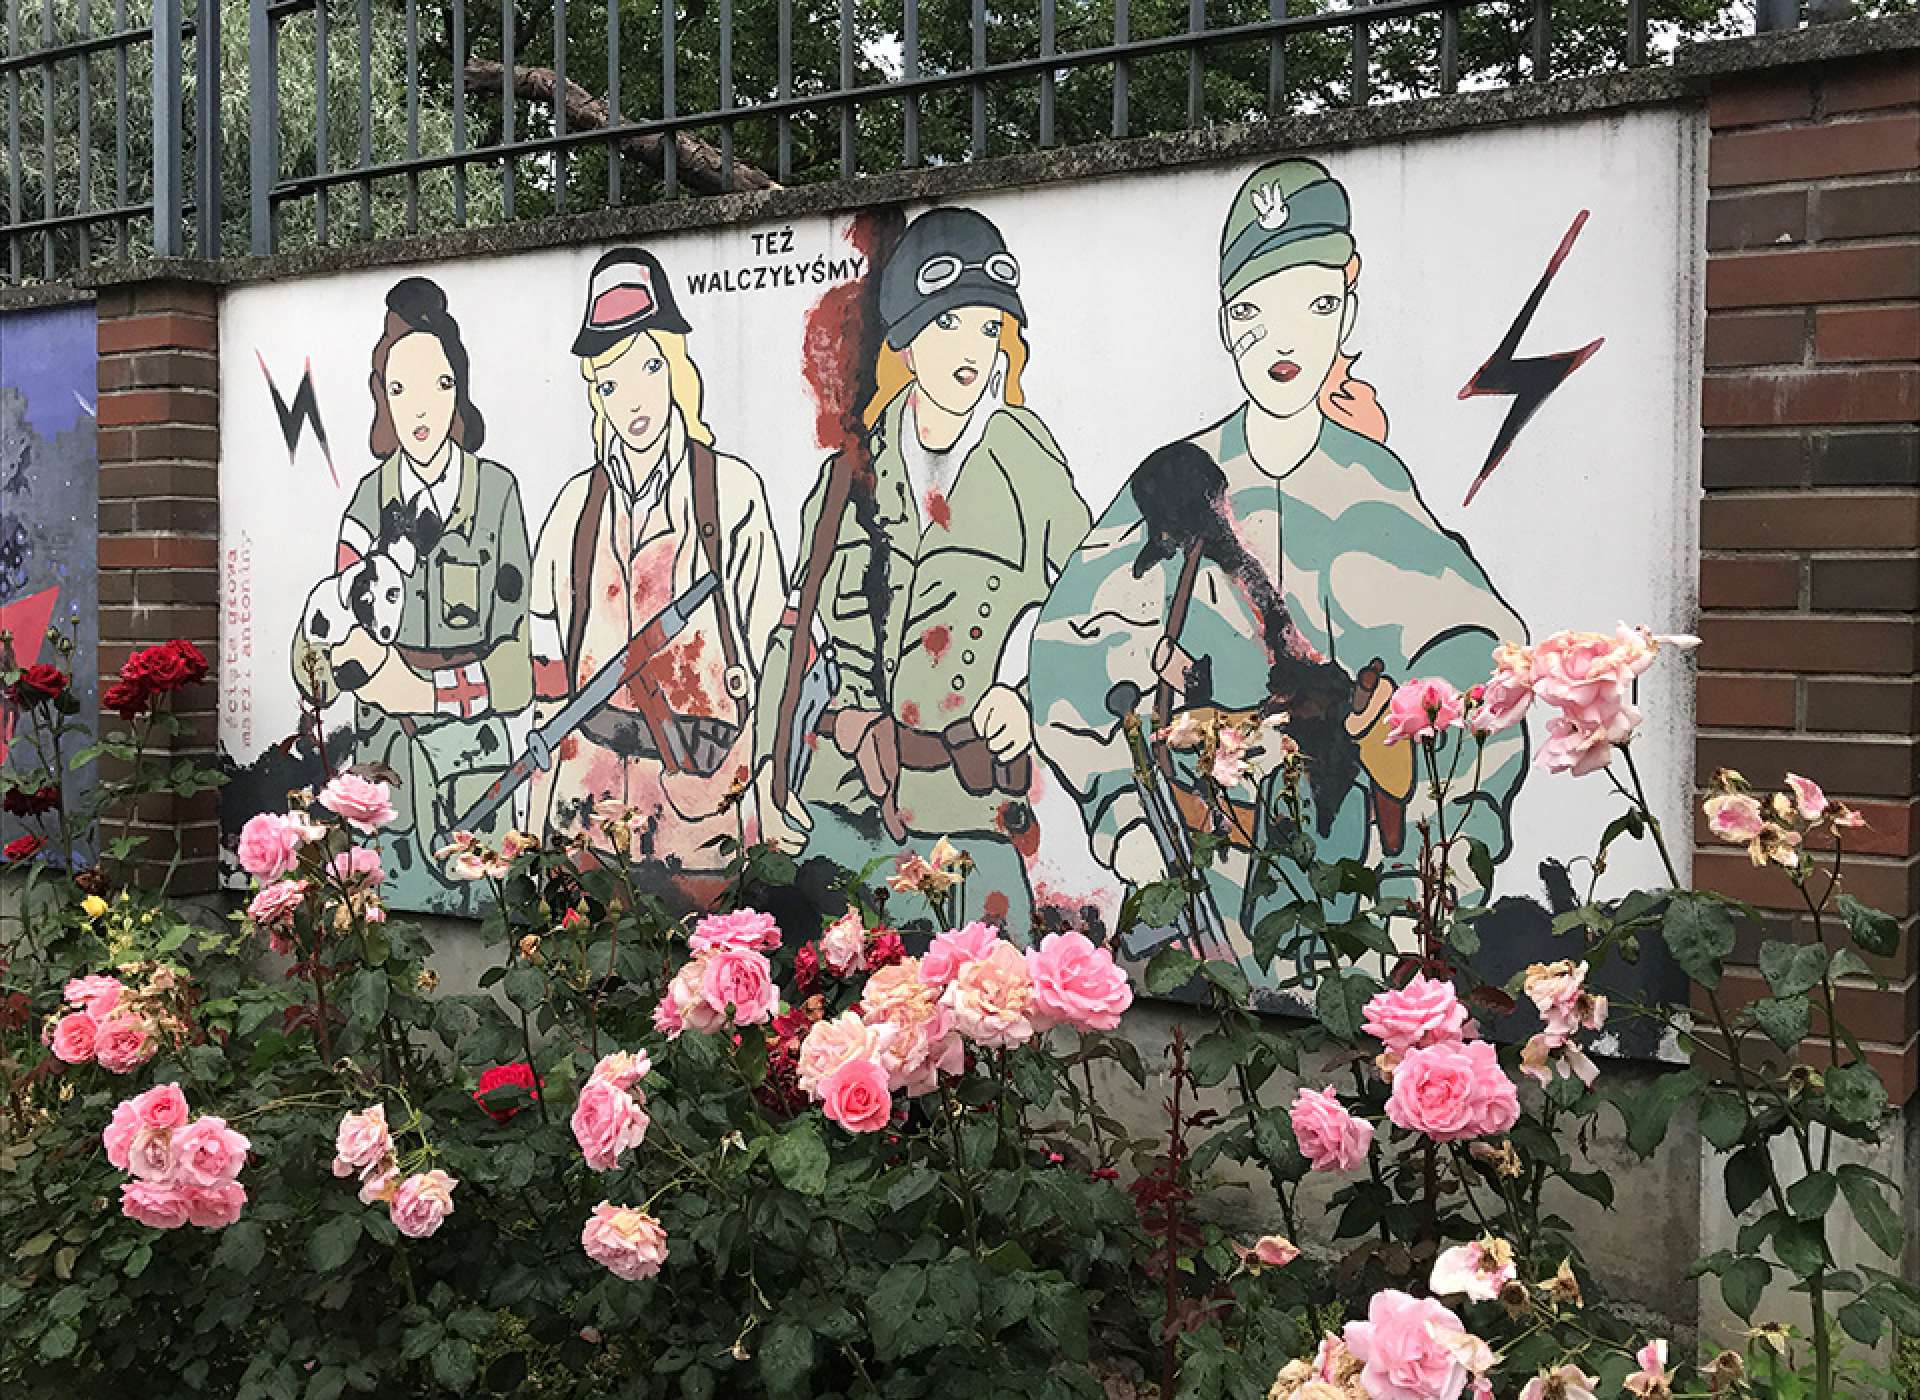 Painting in the courtyard behind The Warsaw Uprising Museum entitled “We also fought.”